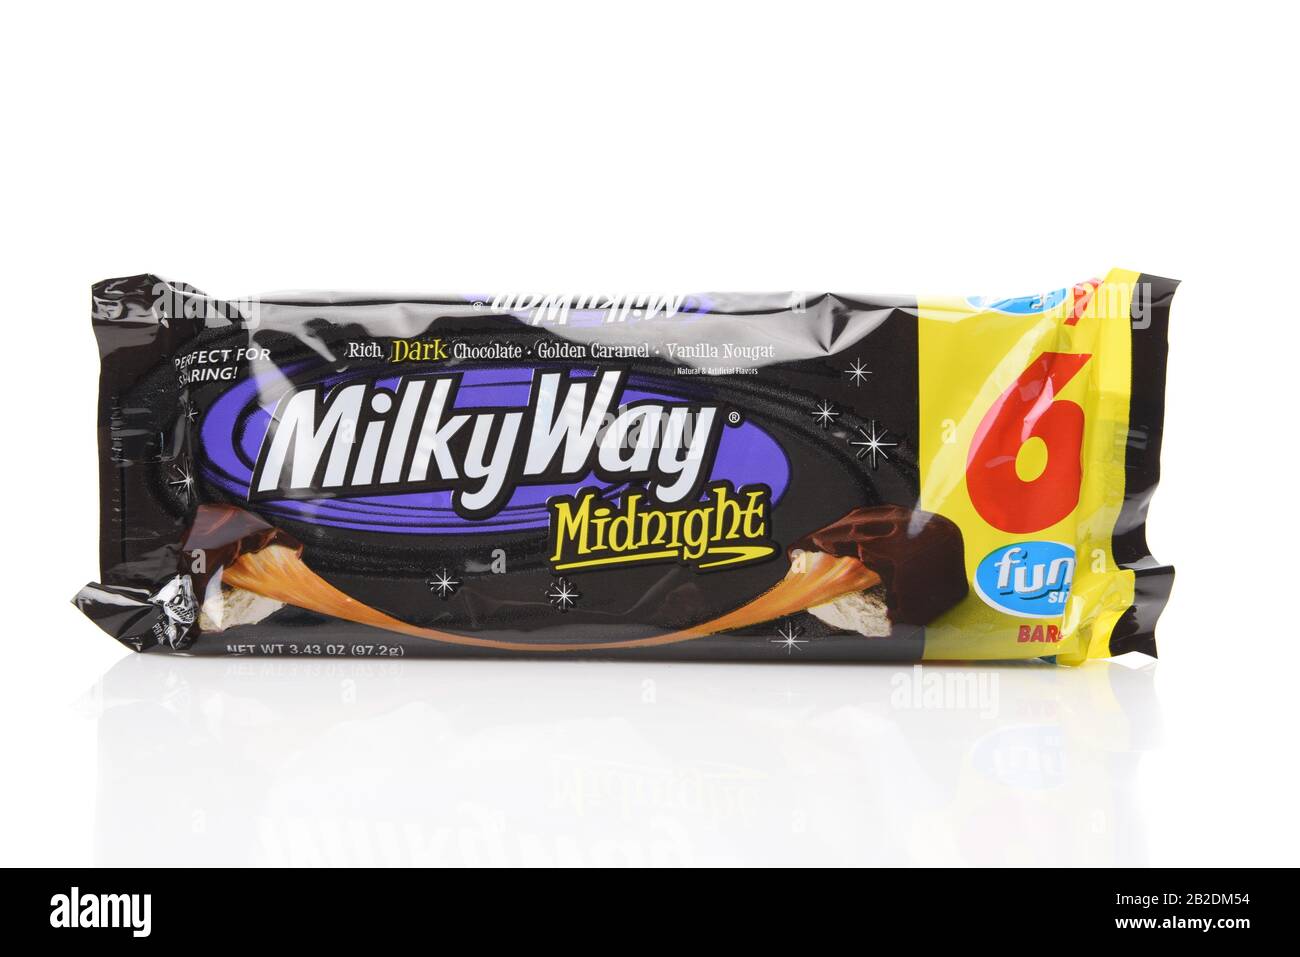 IRVINE, CALIFORNIA - AUGUST 14, 2019: A package of Fun Size Milky Way Midnight candy bars. Stock Photo